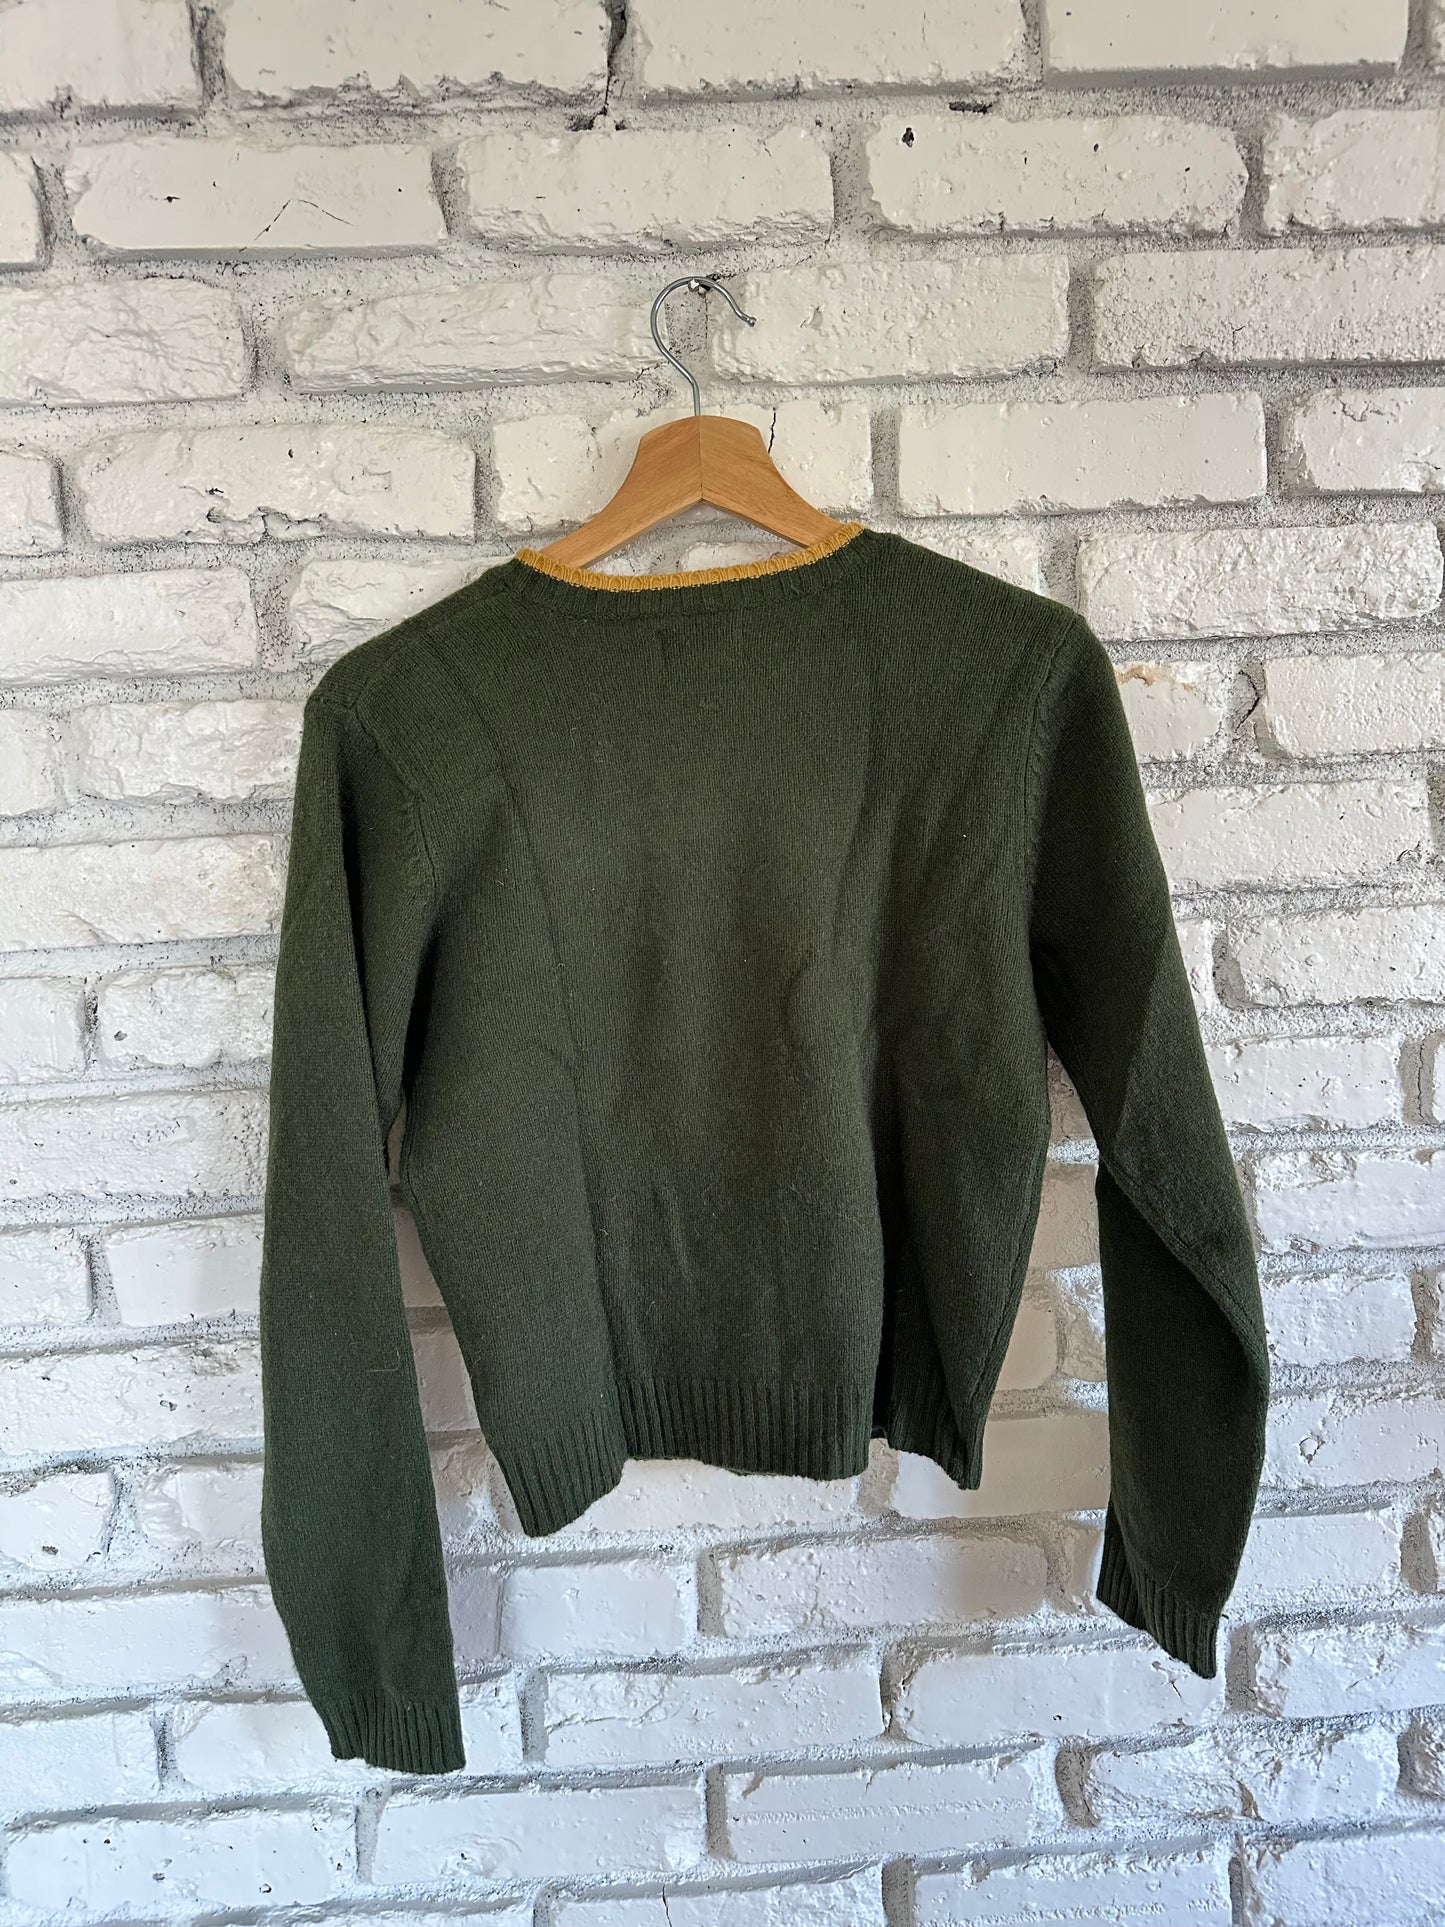 The Heather FITCH Sweater